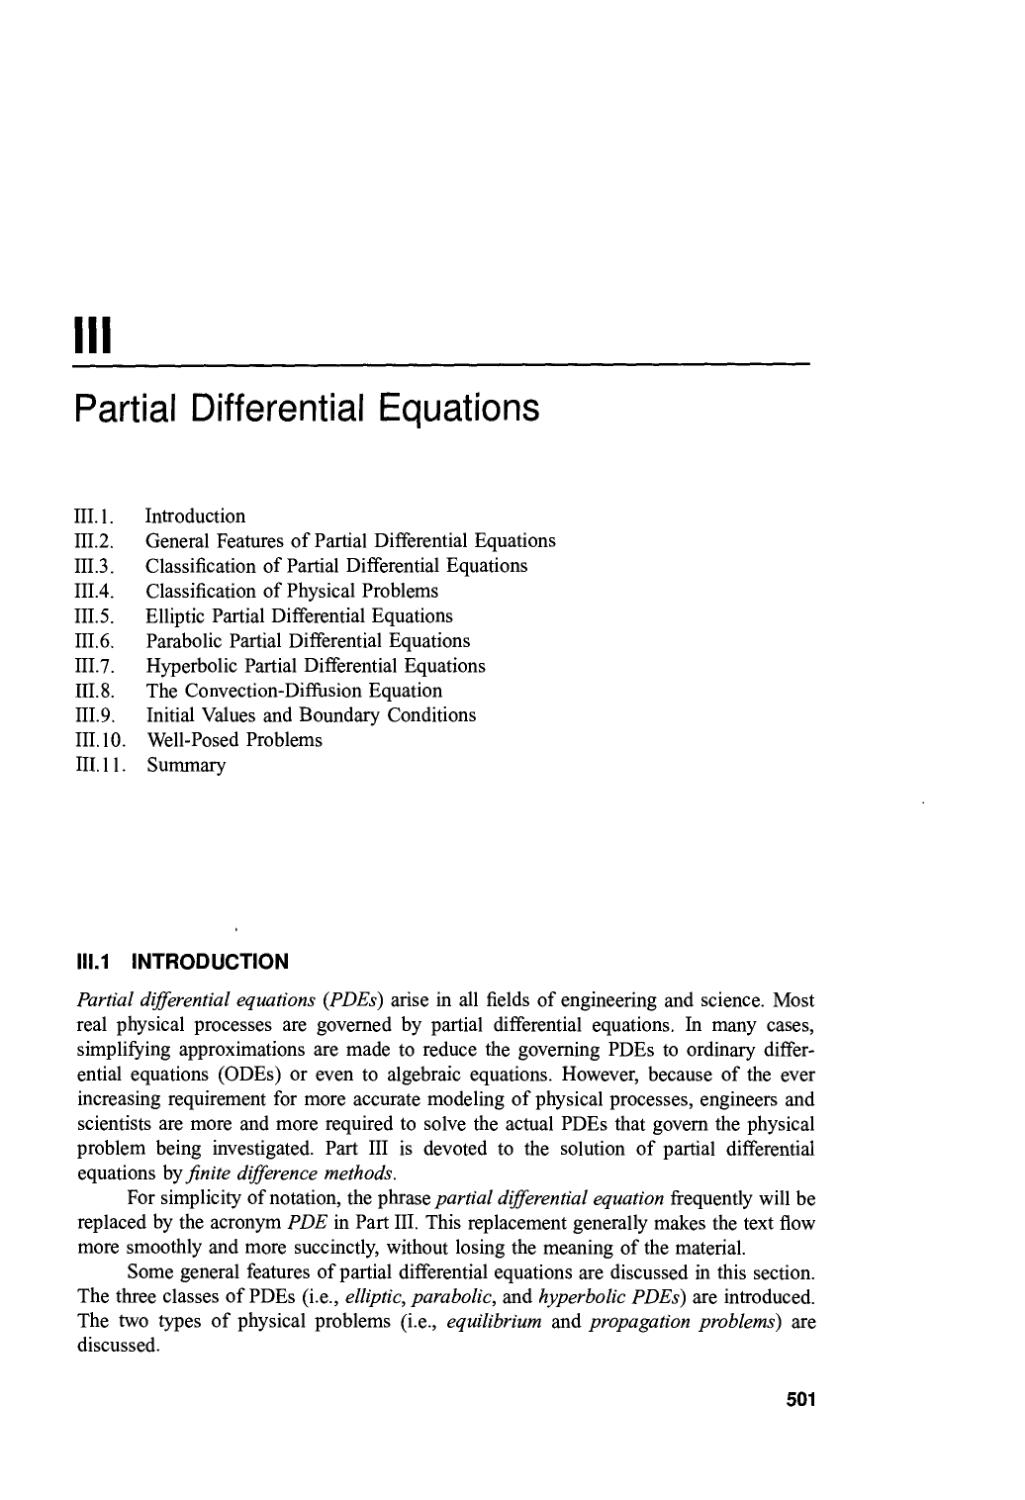 III.  Partial Differential Equations